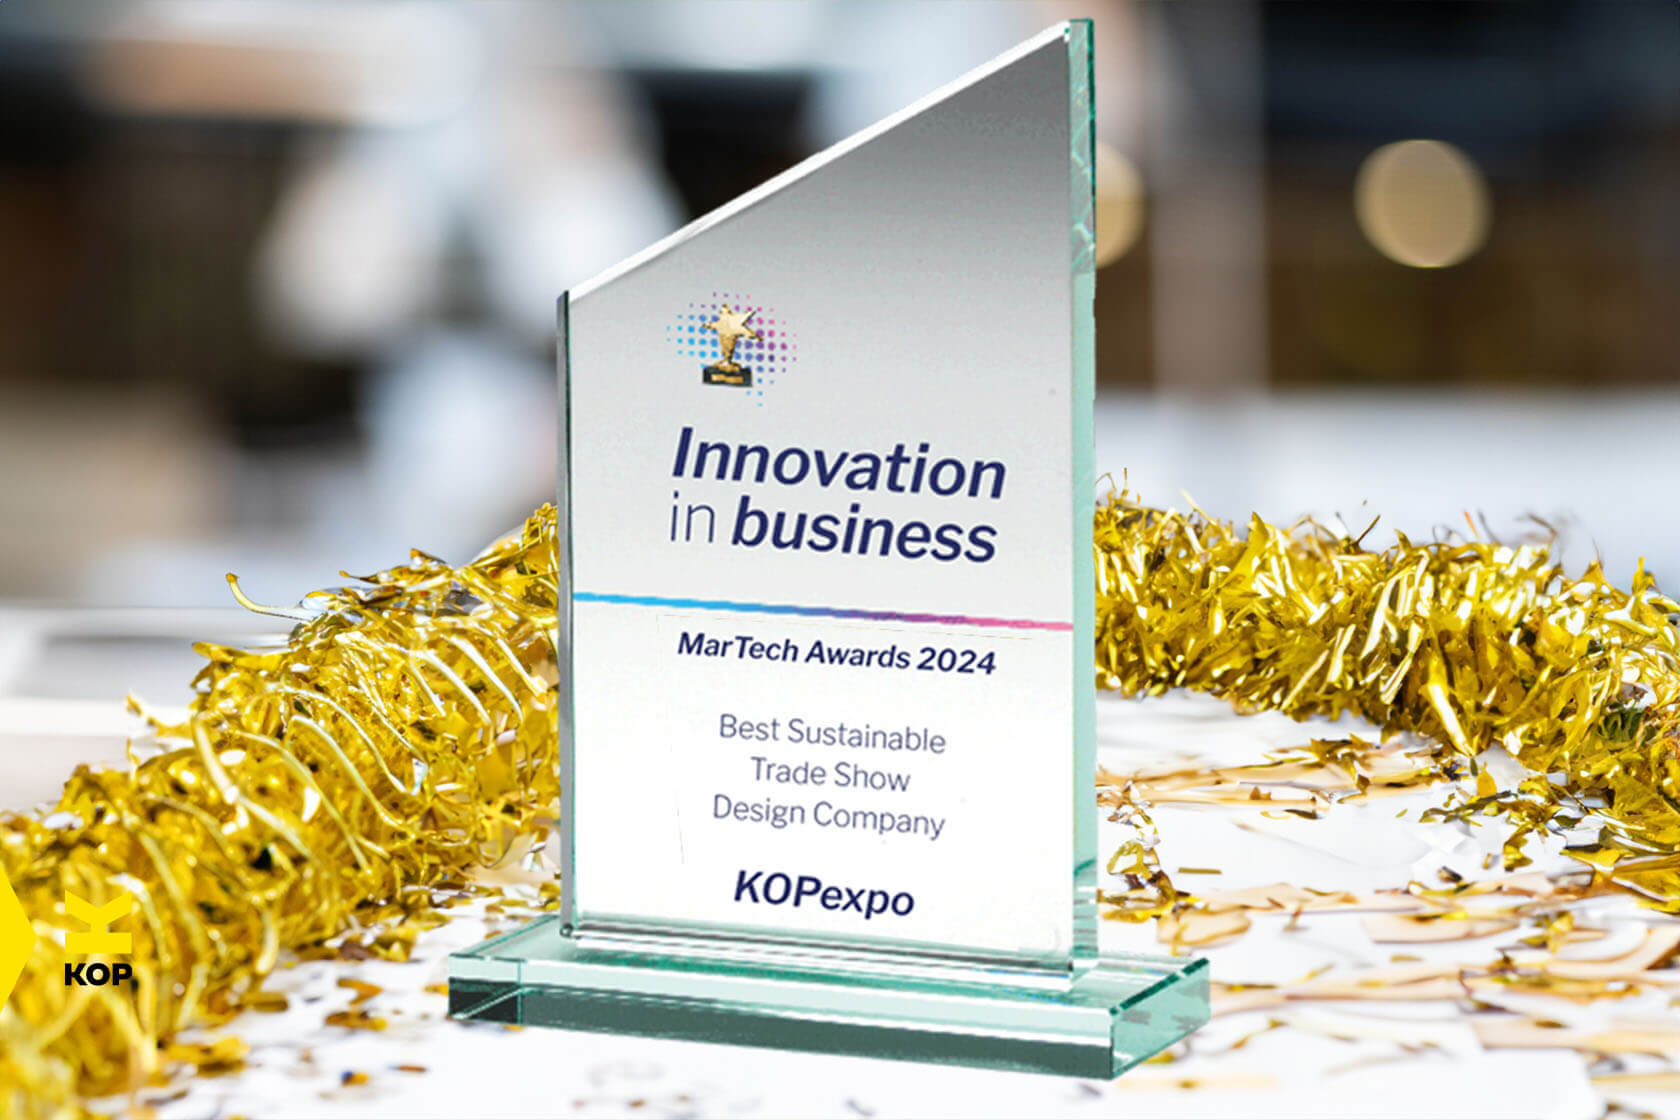 KOP: The best sustainable trade show design company 2024 in Europe